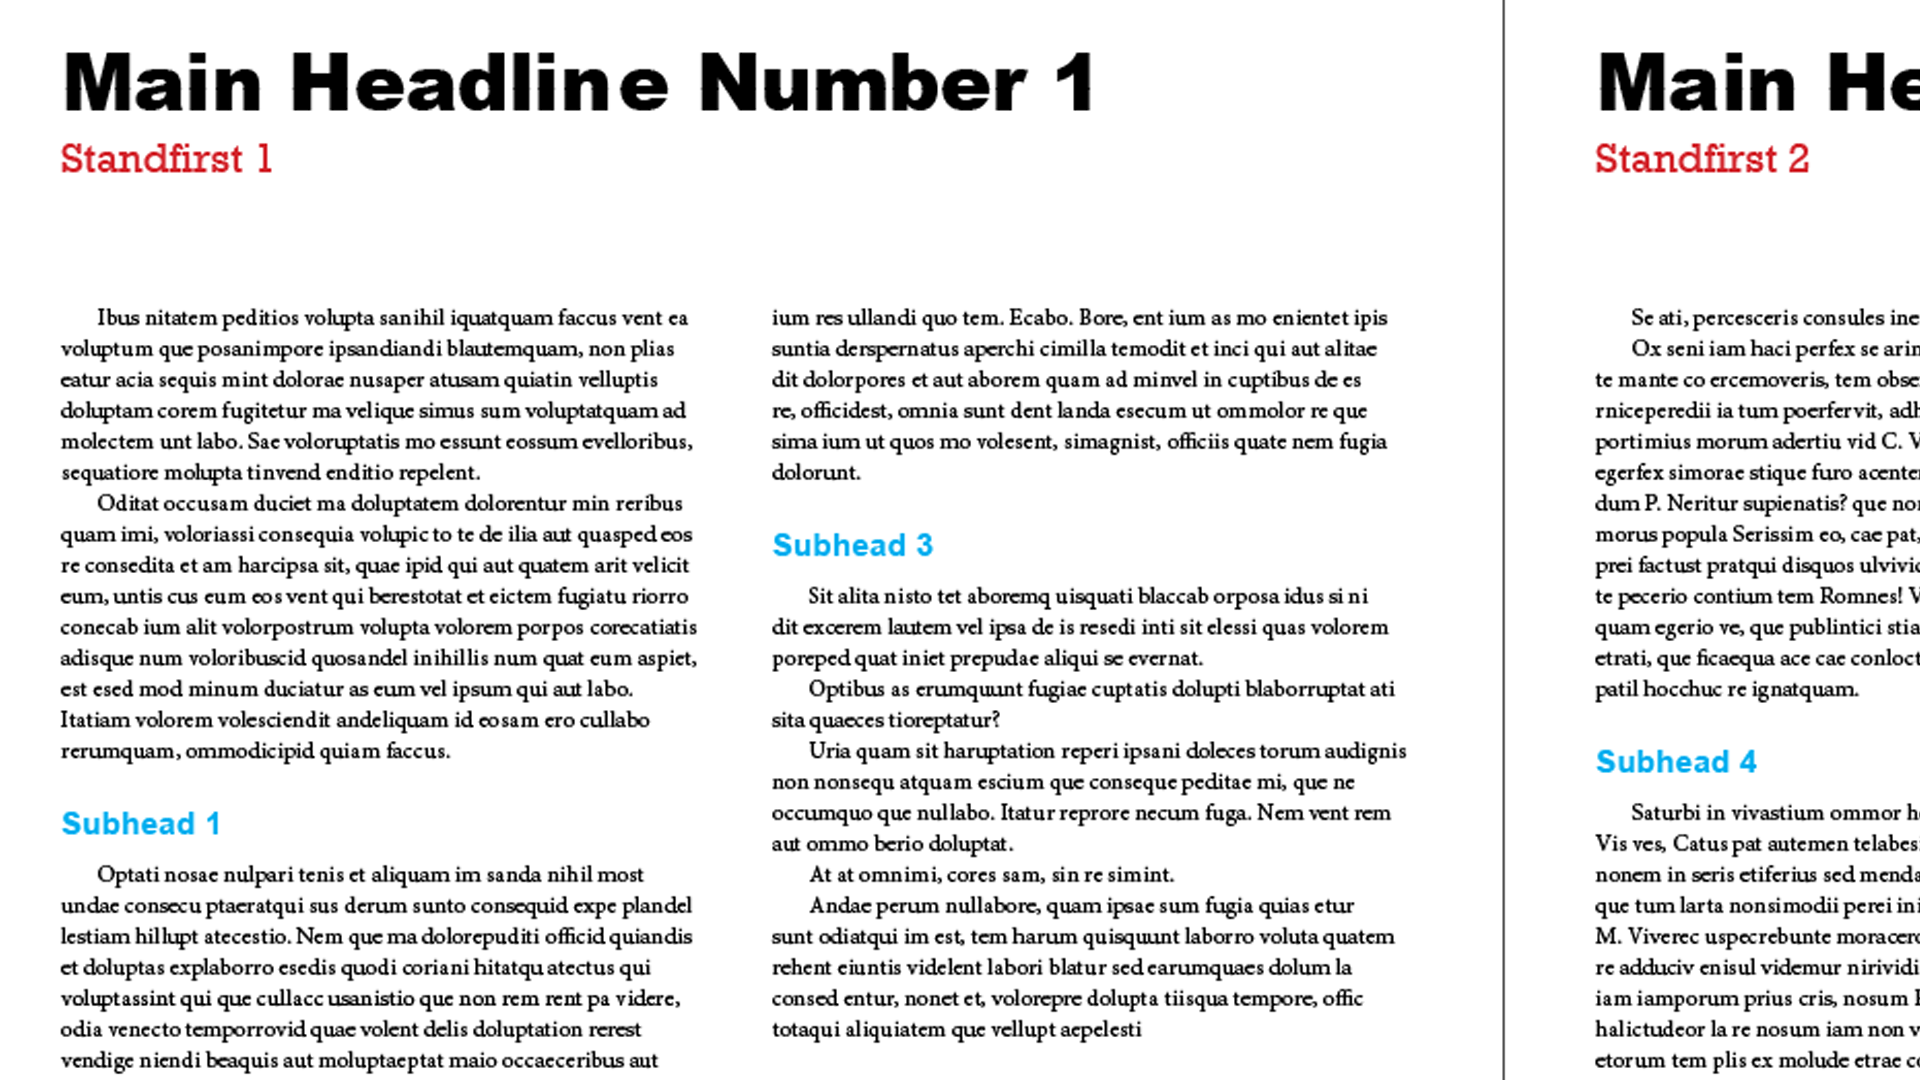 indesign most paragraph styles applied